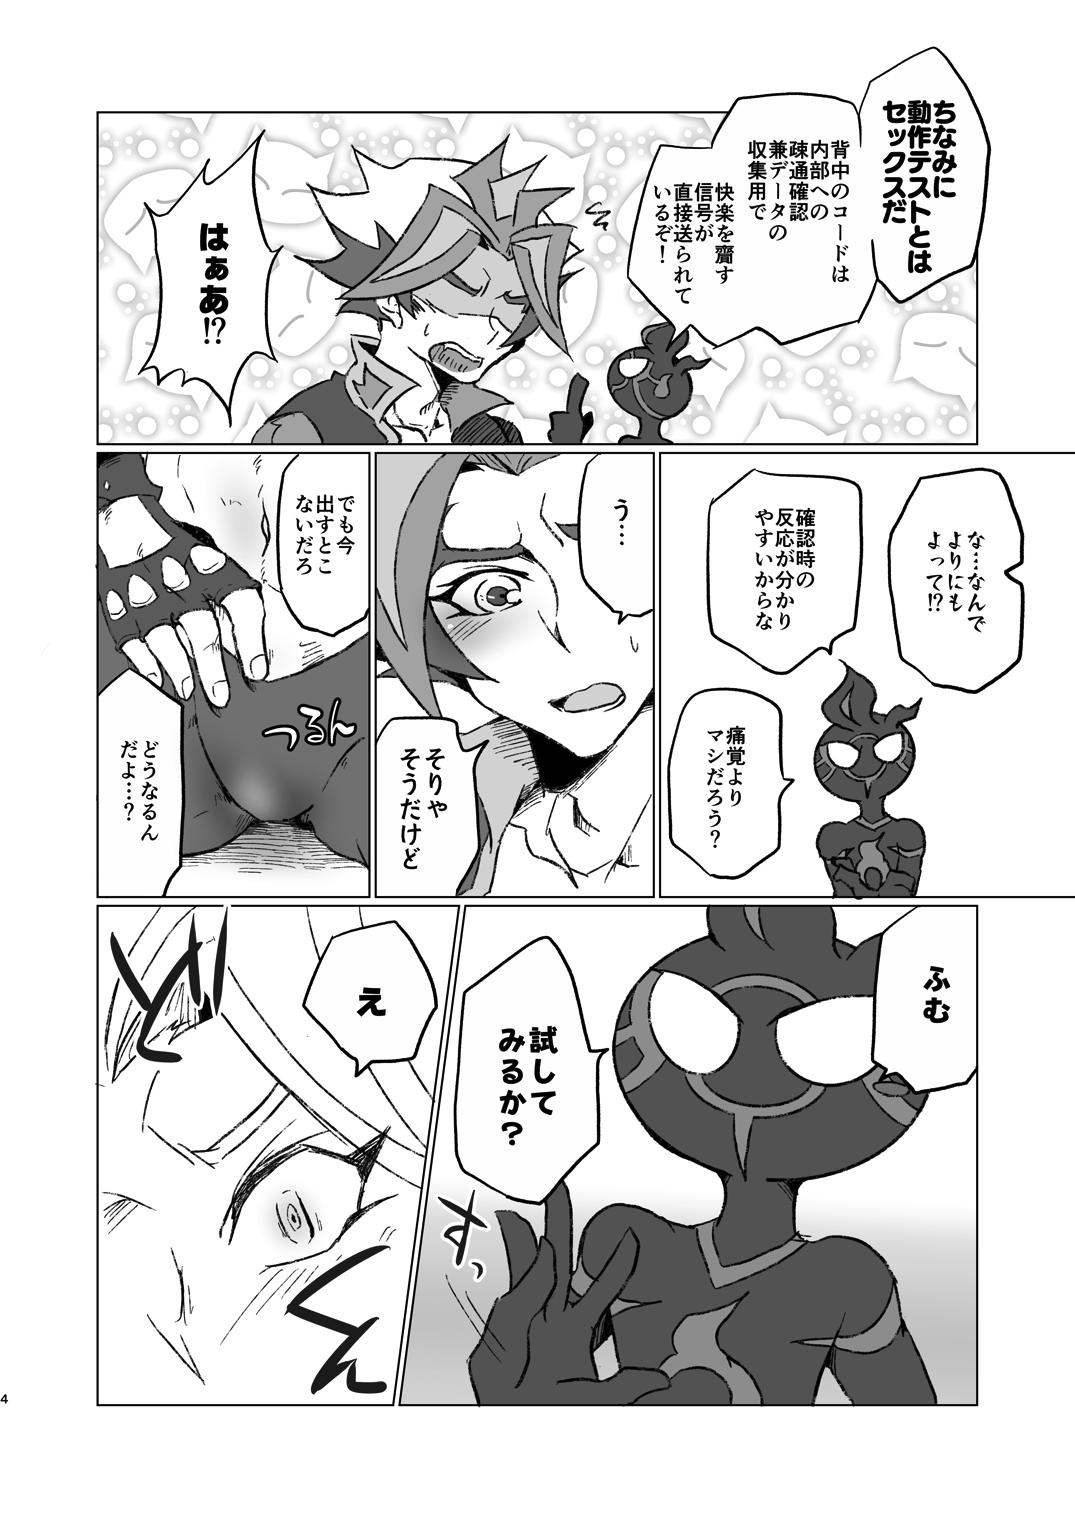 Old Man A little bit further - Yu-gi-oh vrains Cam Girl - Page 3